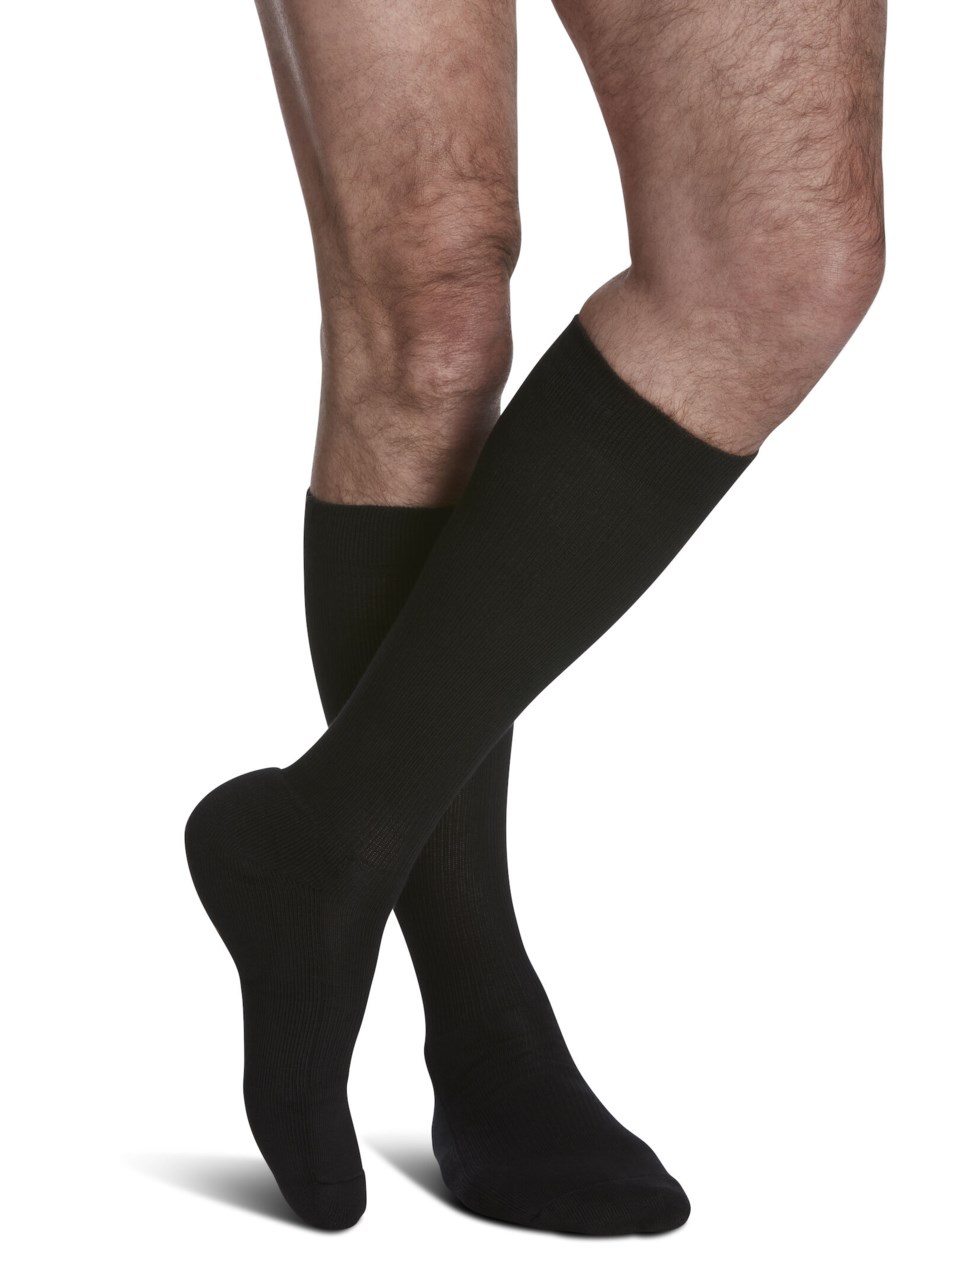 Male wearing MOTION CUSHIONED COTTON compression socks in BLACK